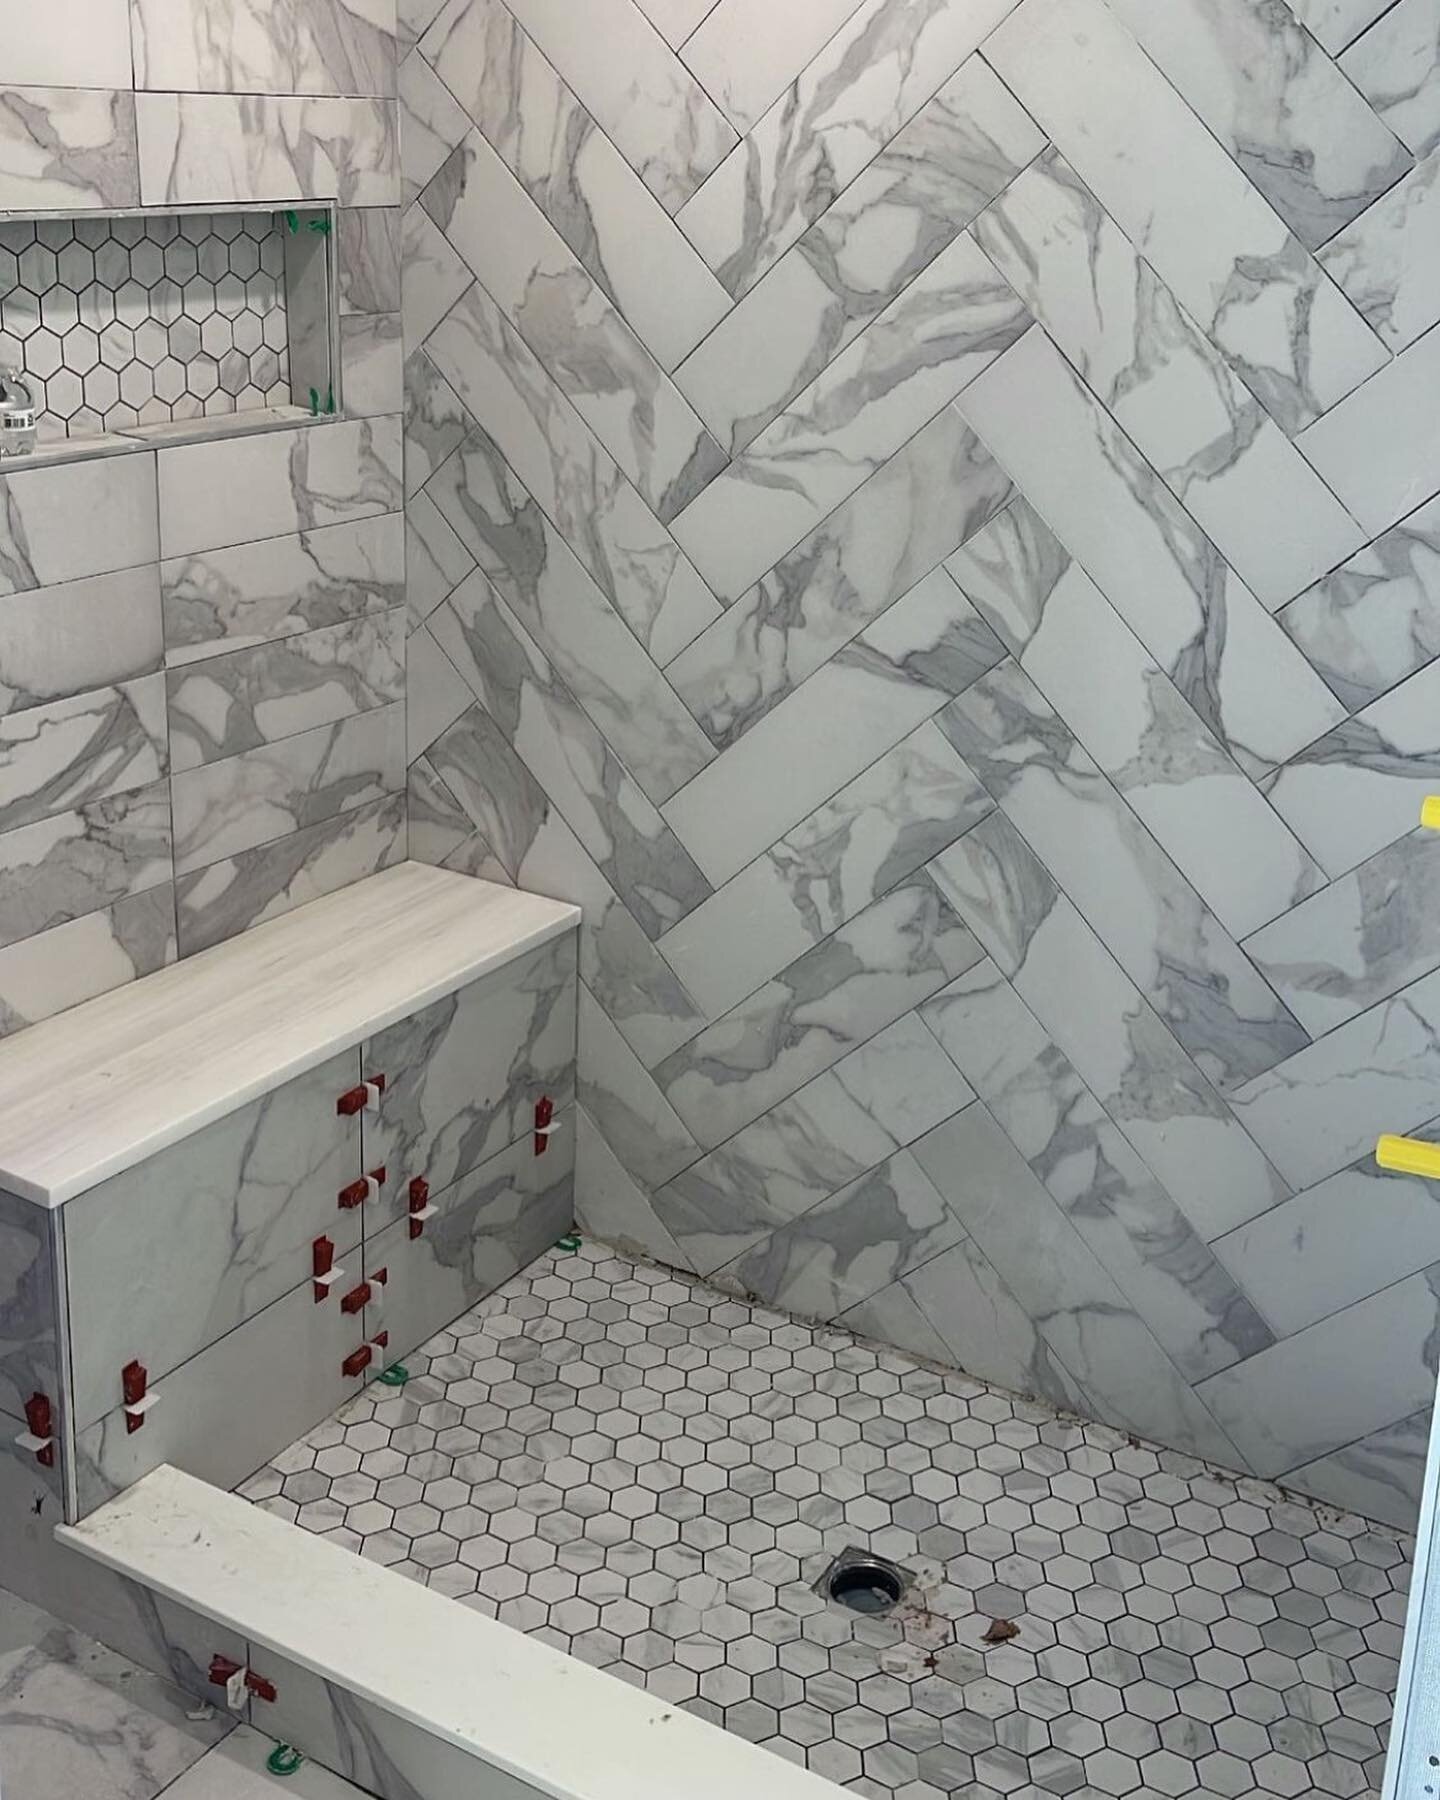 Progress on a client&rsquo;s dream bathroom! 
🛁
Swipe ➡️ to see the inspiration &amp; design plan and the before shot.
🤯
Stay tuned for the completed room!
🏠 
#casaandfern #design #designer #bathroomremodel #bath #shower #marbletiles #hexagontiles